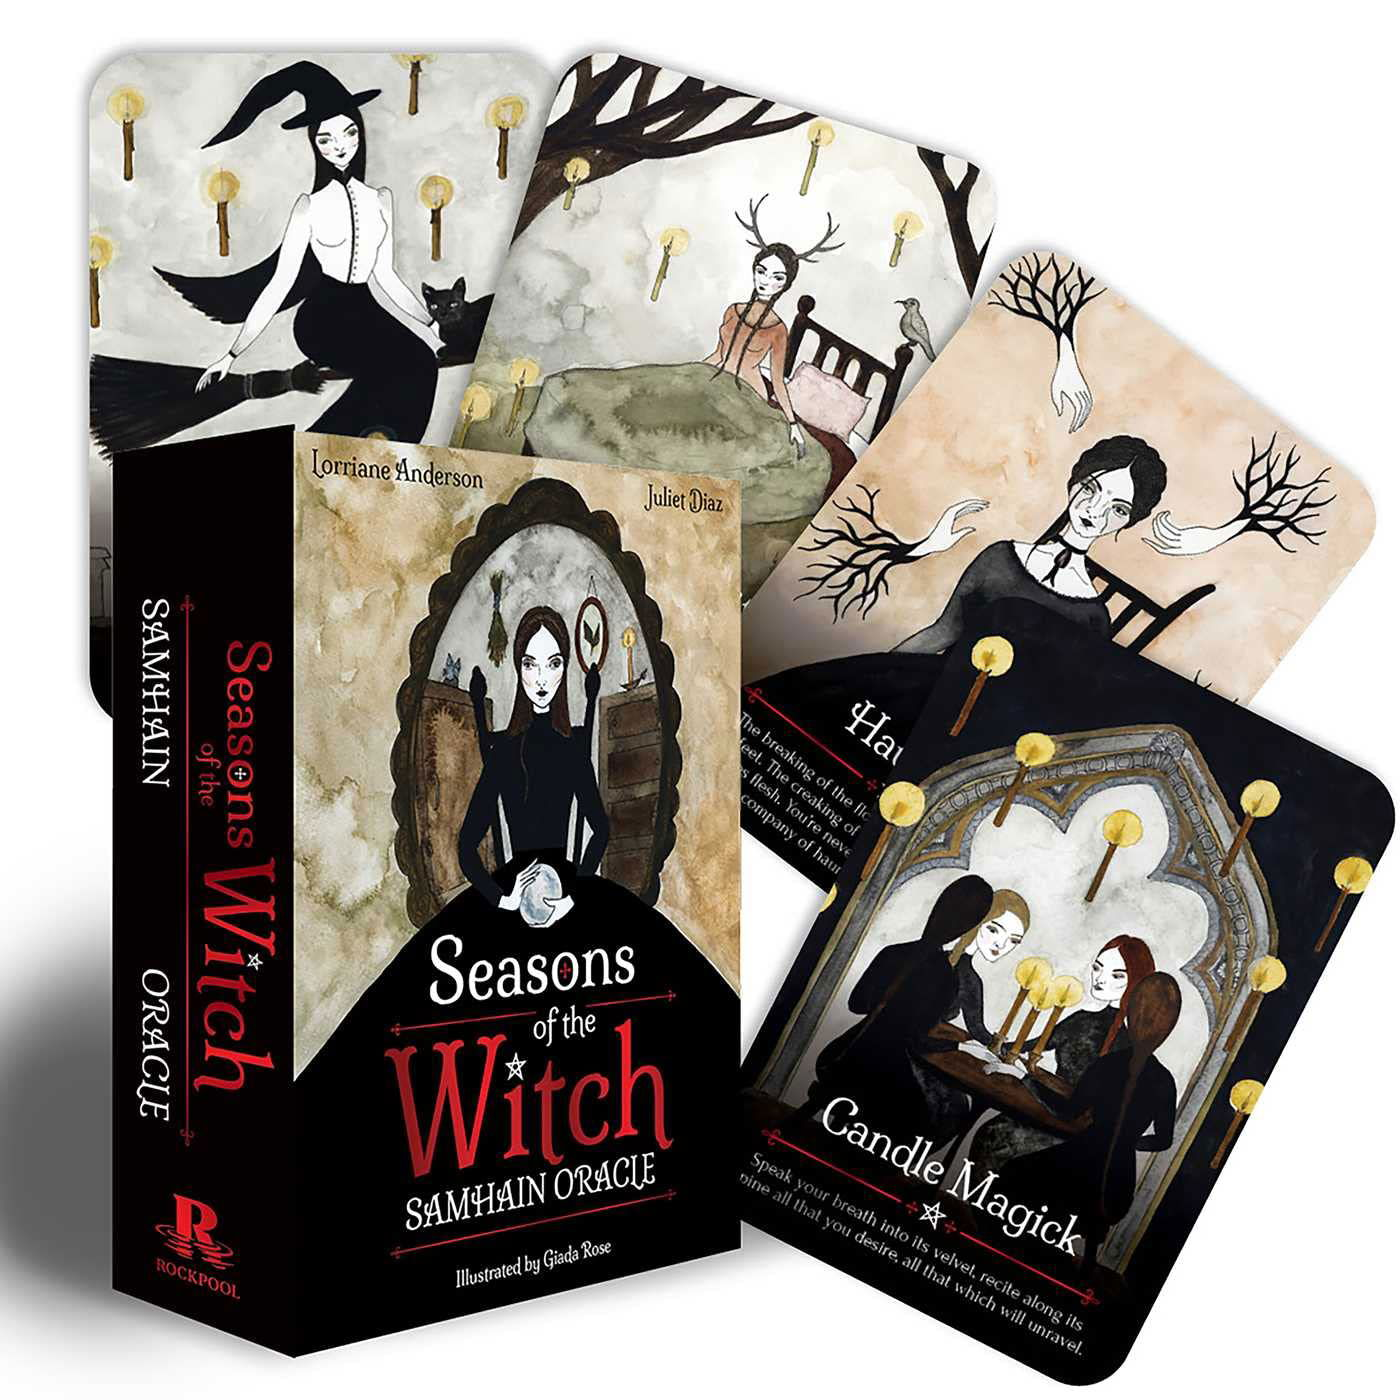 Seasons of the Witch: Samhain Oracle - R$ 250,00